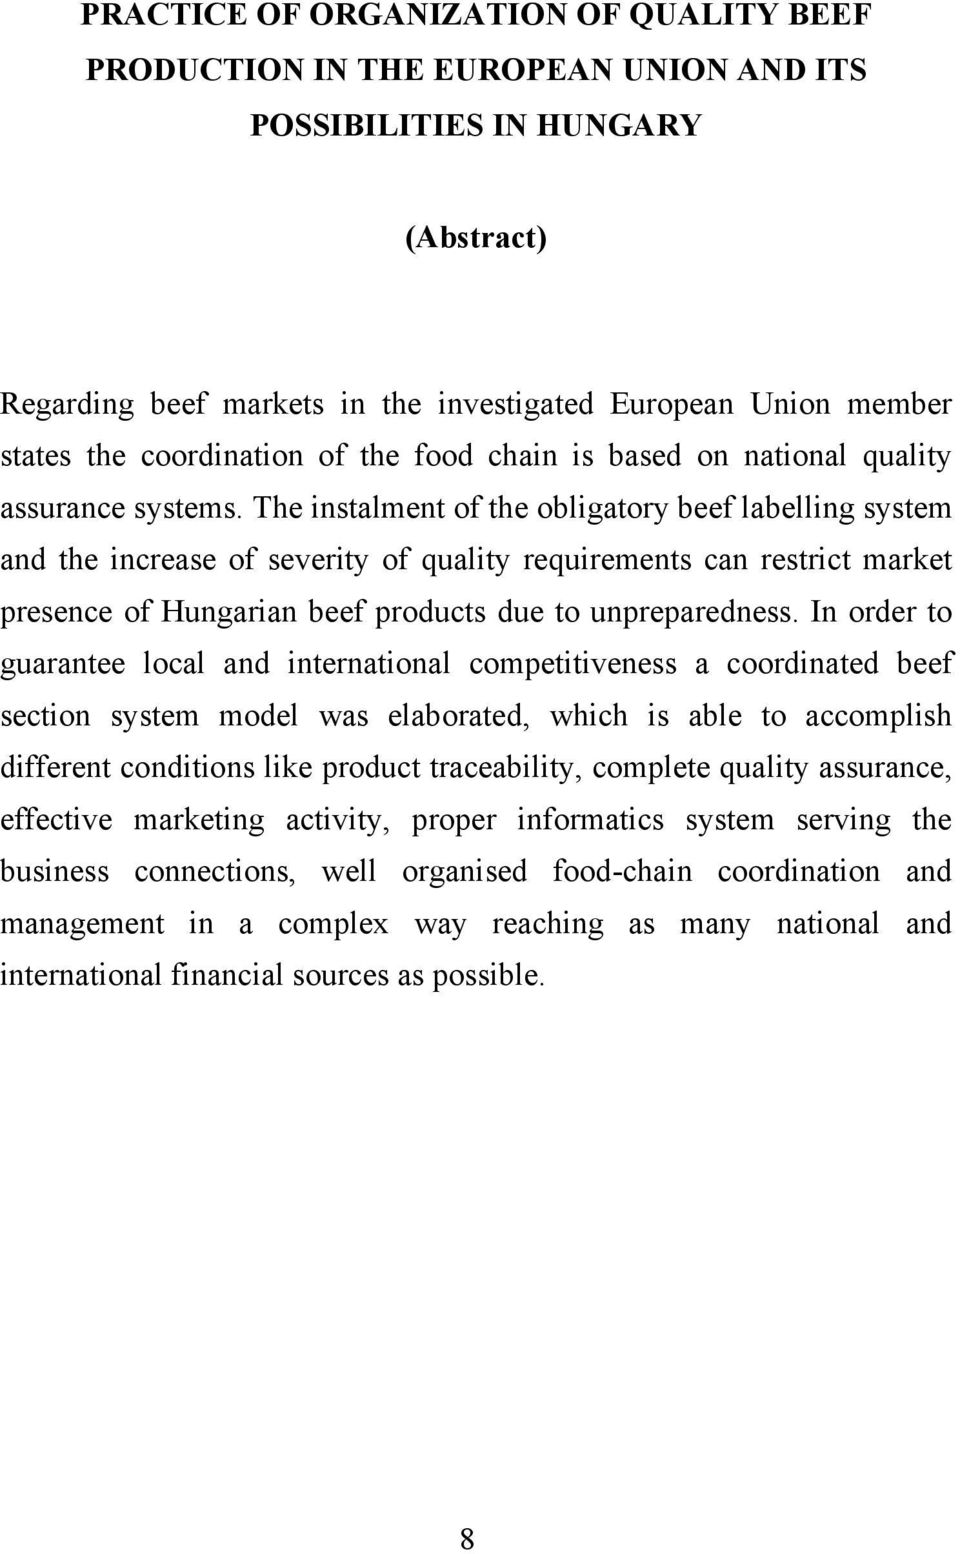 The instalment of the obligatory beef labelling system and the increase of severity of quality requirements can restrict market presence of Hungarian beef products due to unpreparedness.